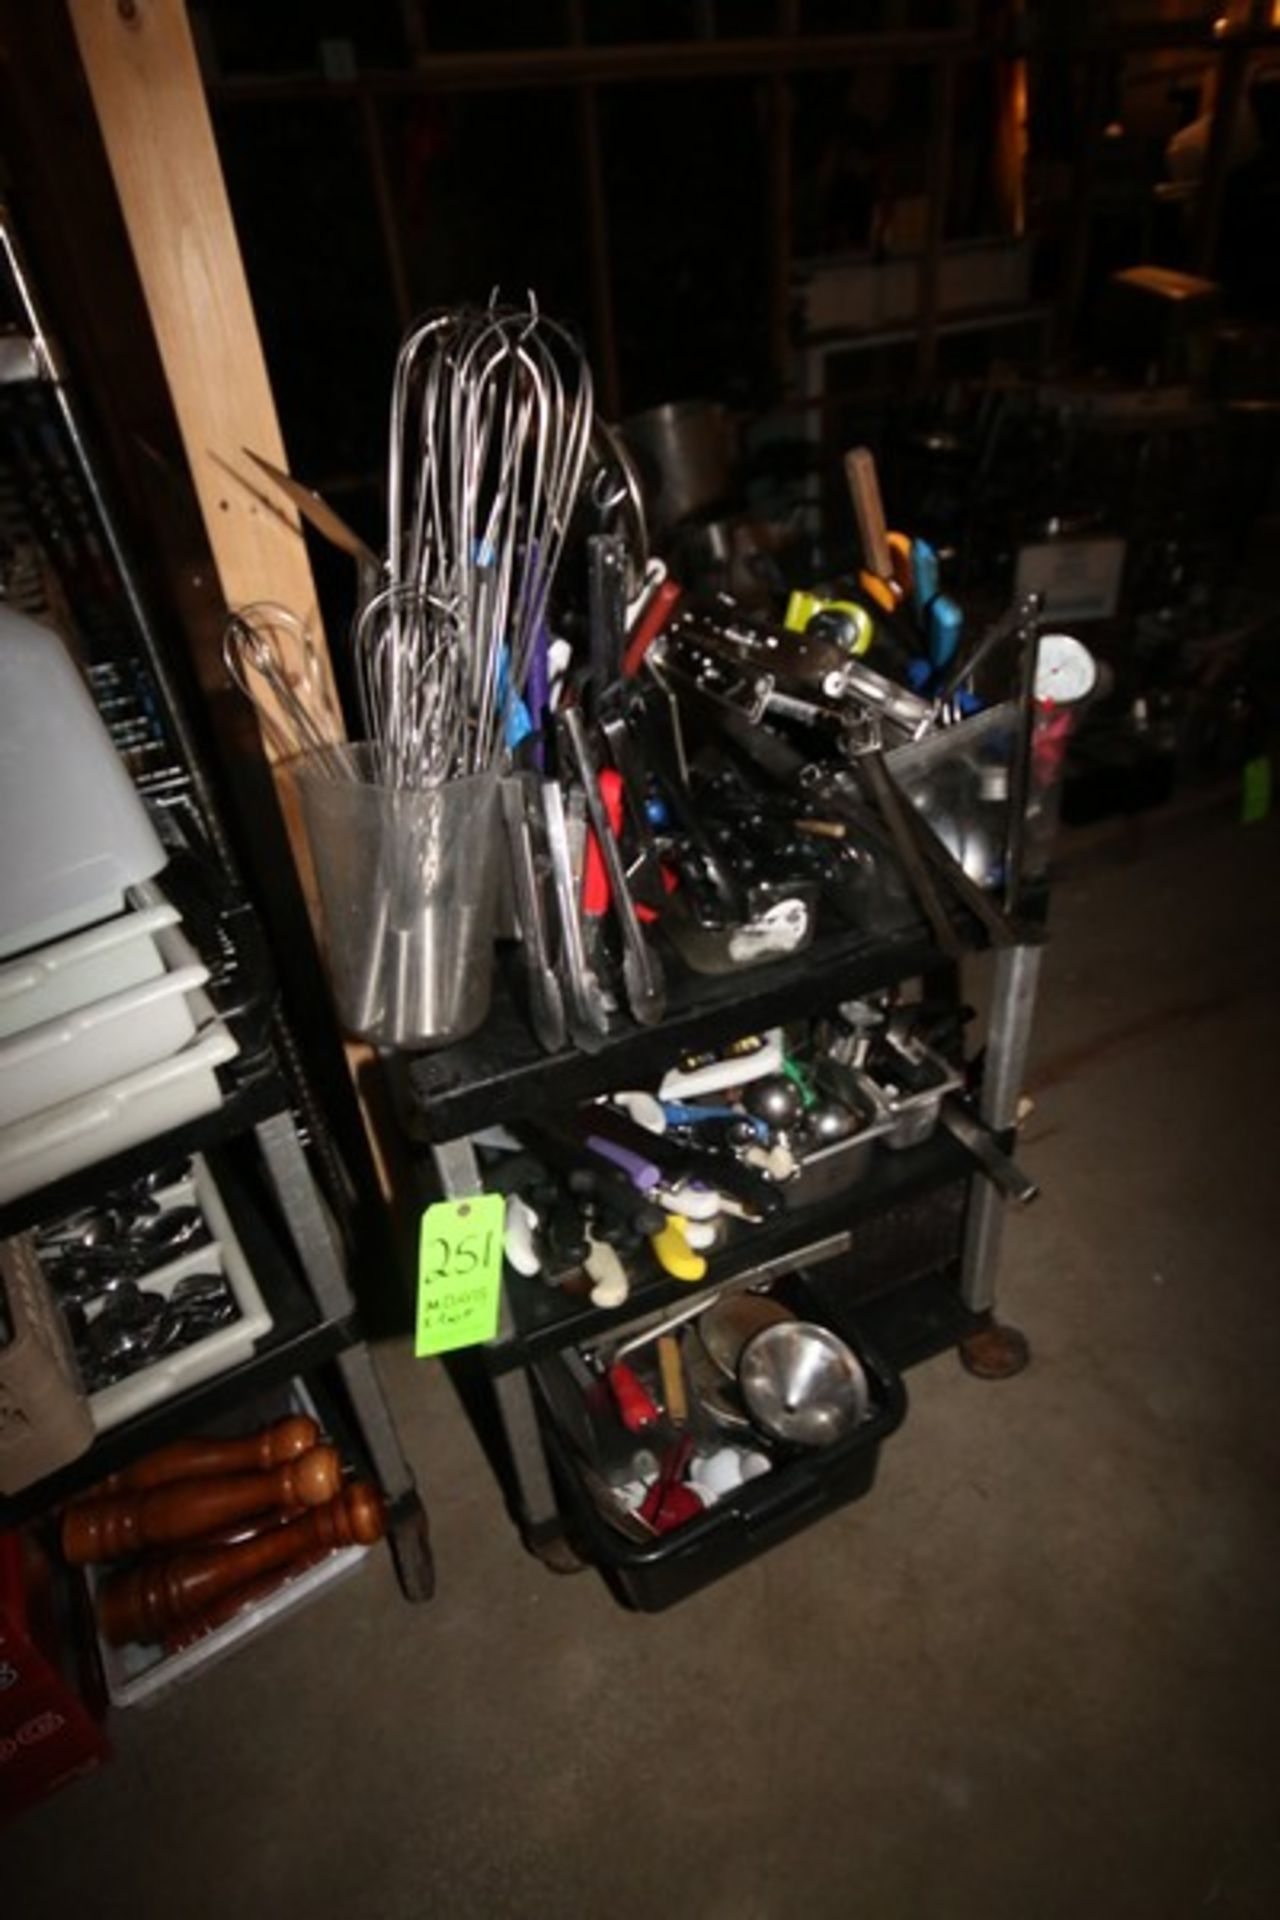 Plastic Cart of S/S Silverware & Misc., Includes S/S Knives, Tongs, Cheese Shredders, Spoons, - Image 2 of 8